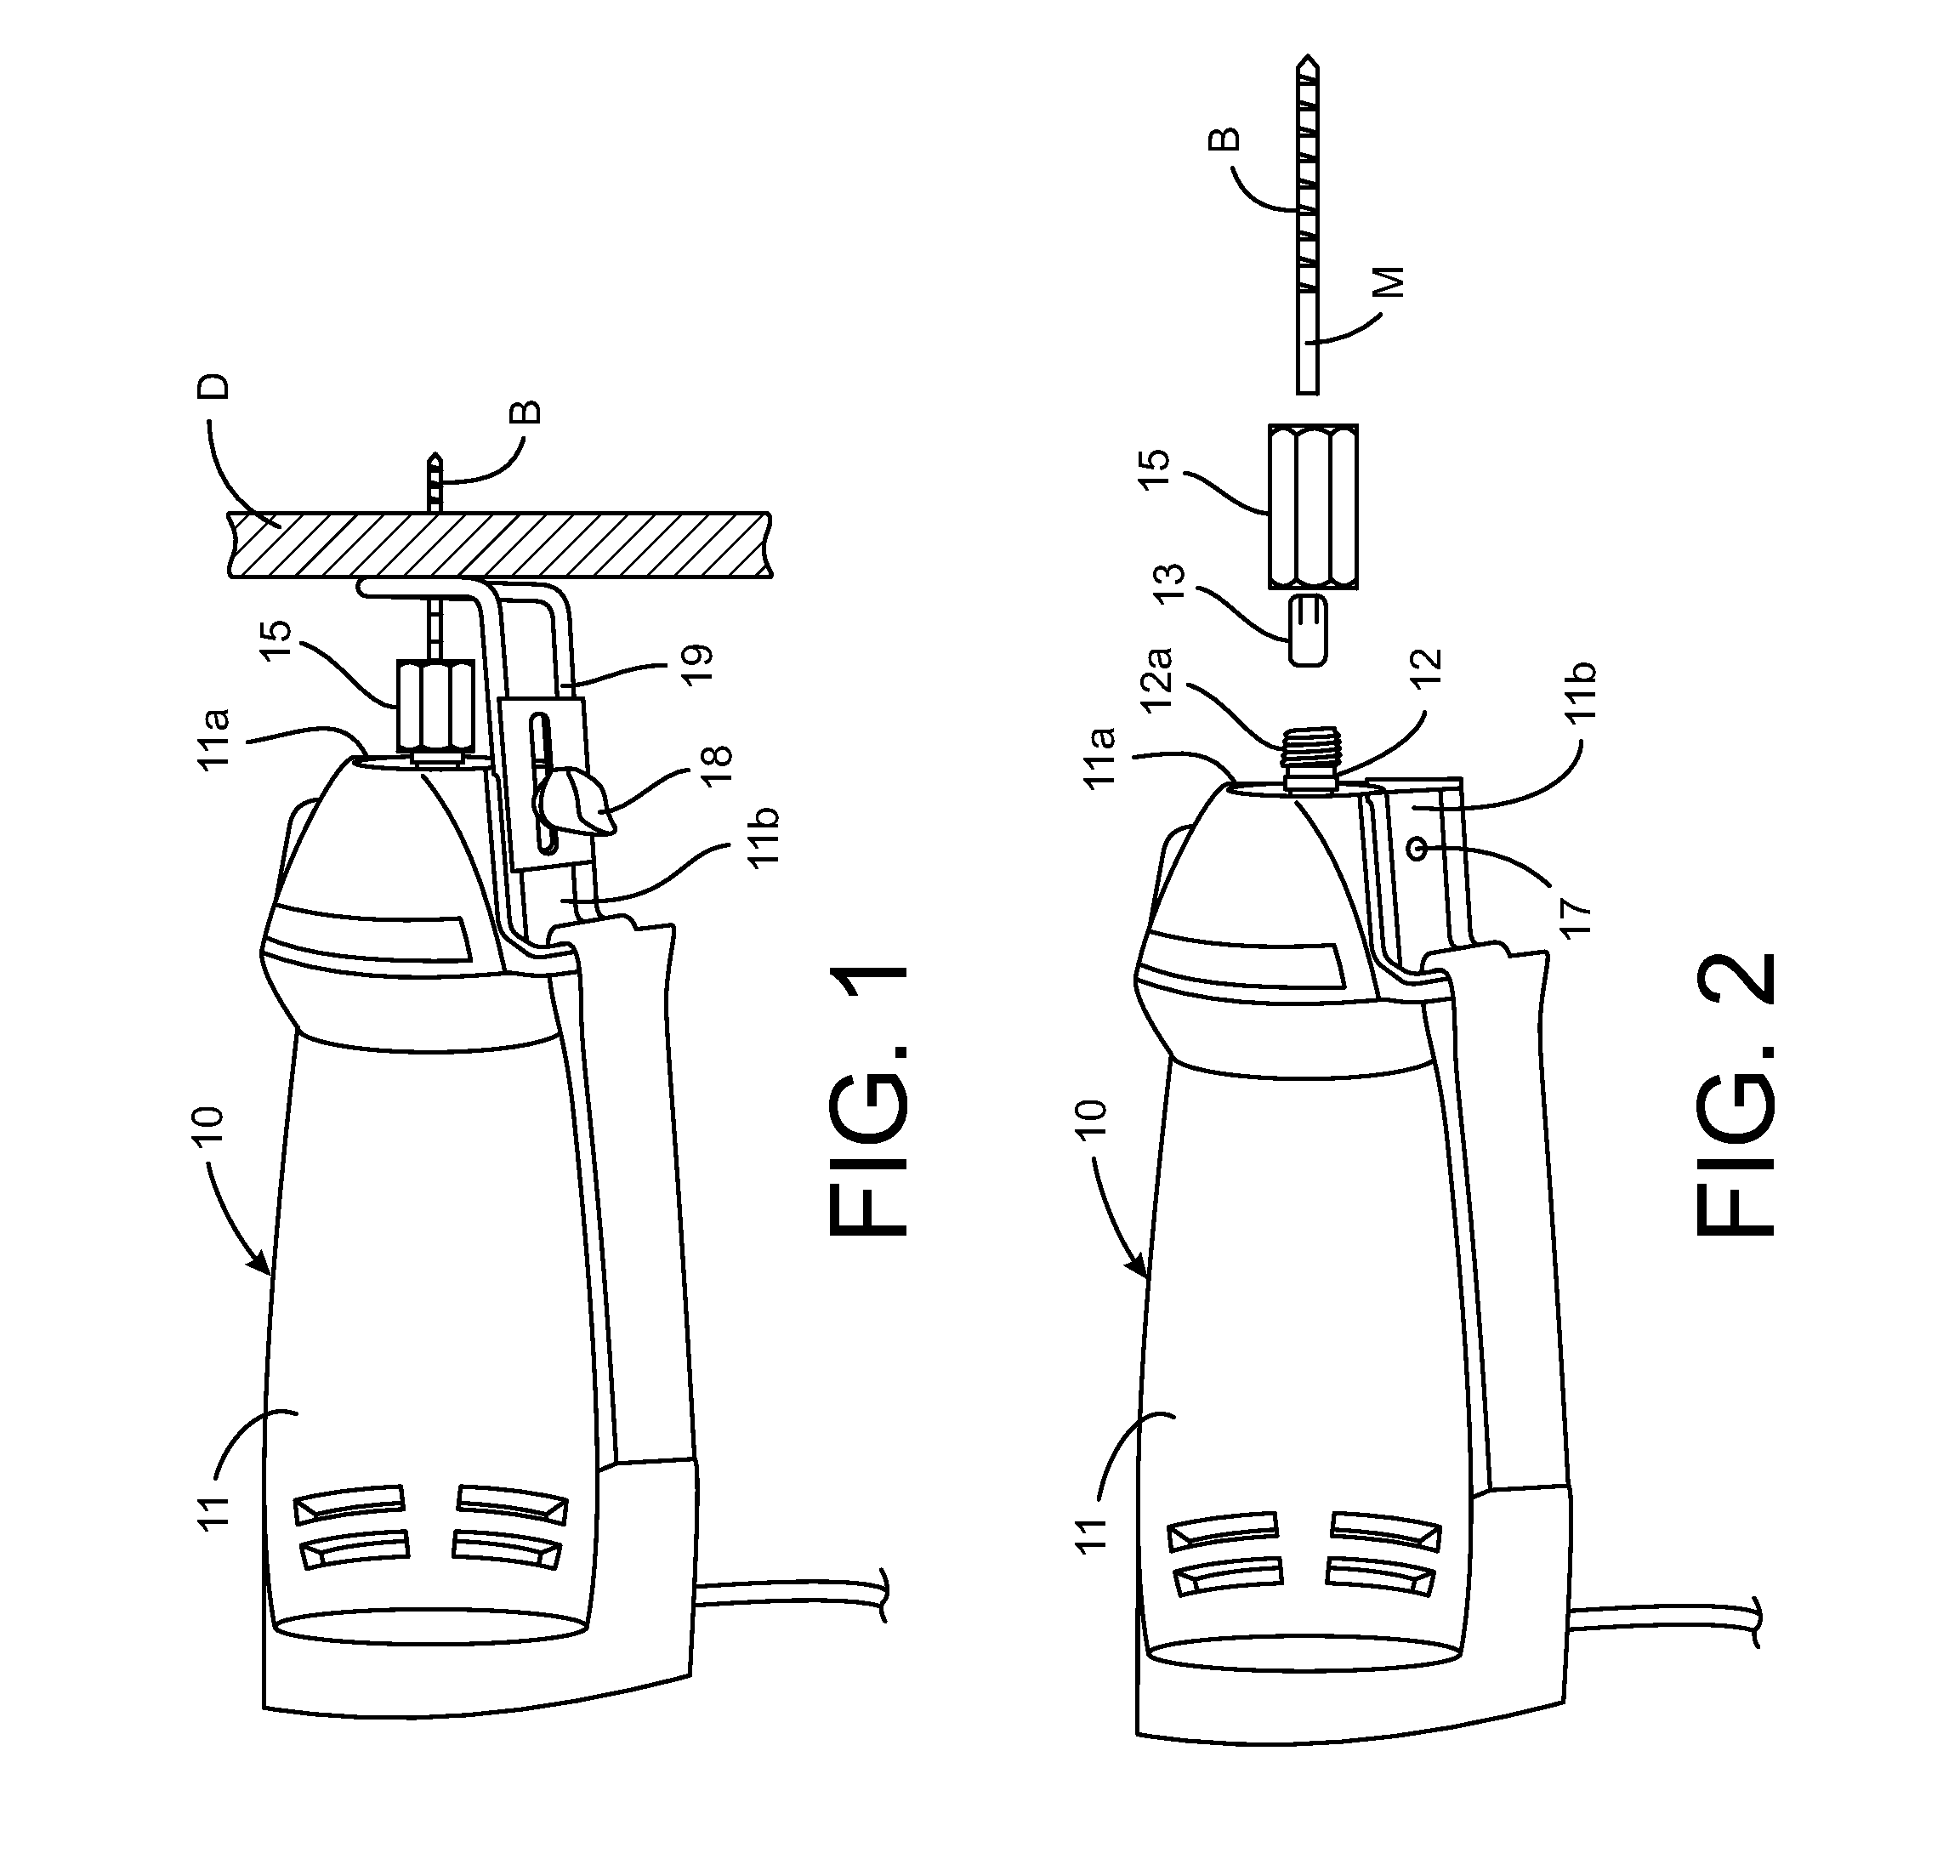 Dust extraction system for a power tool